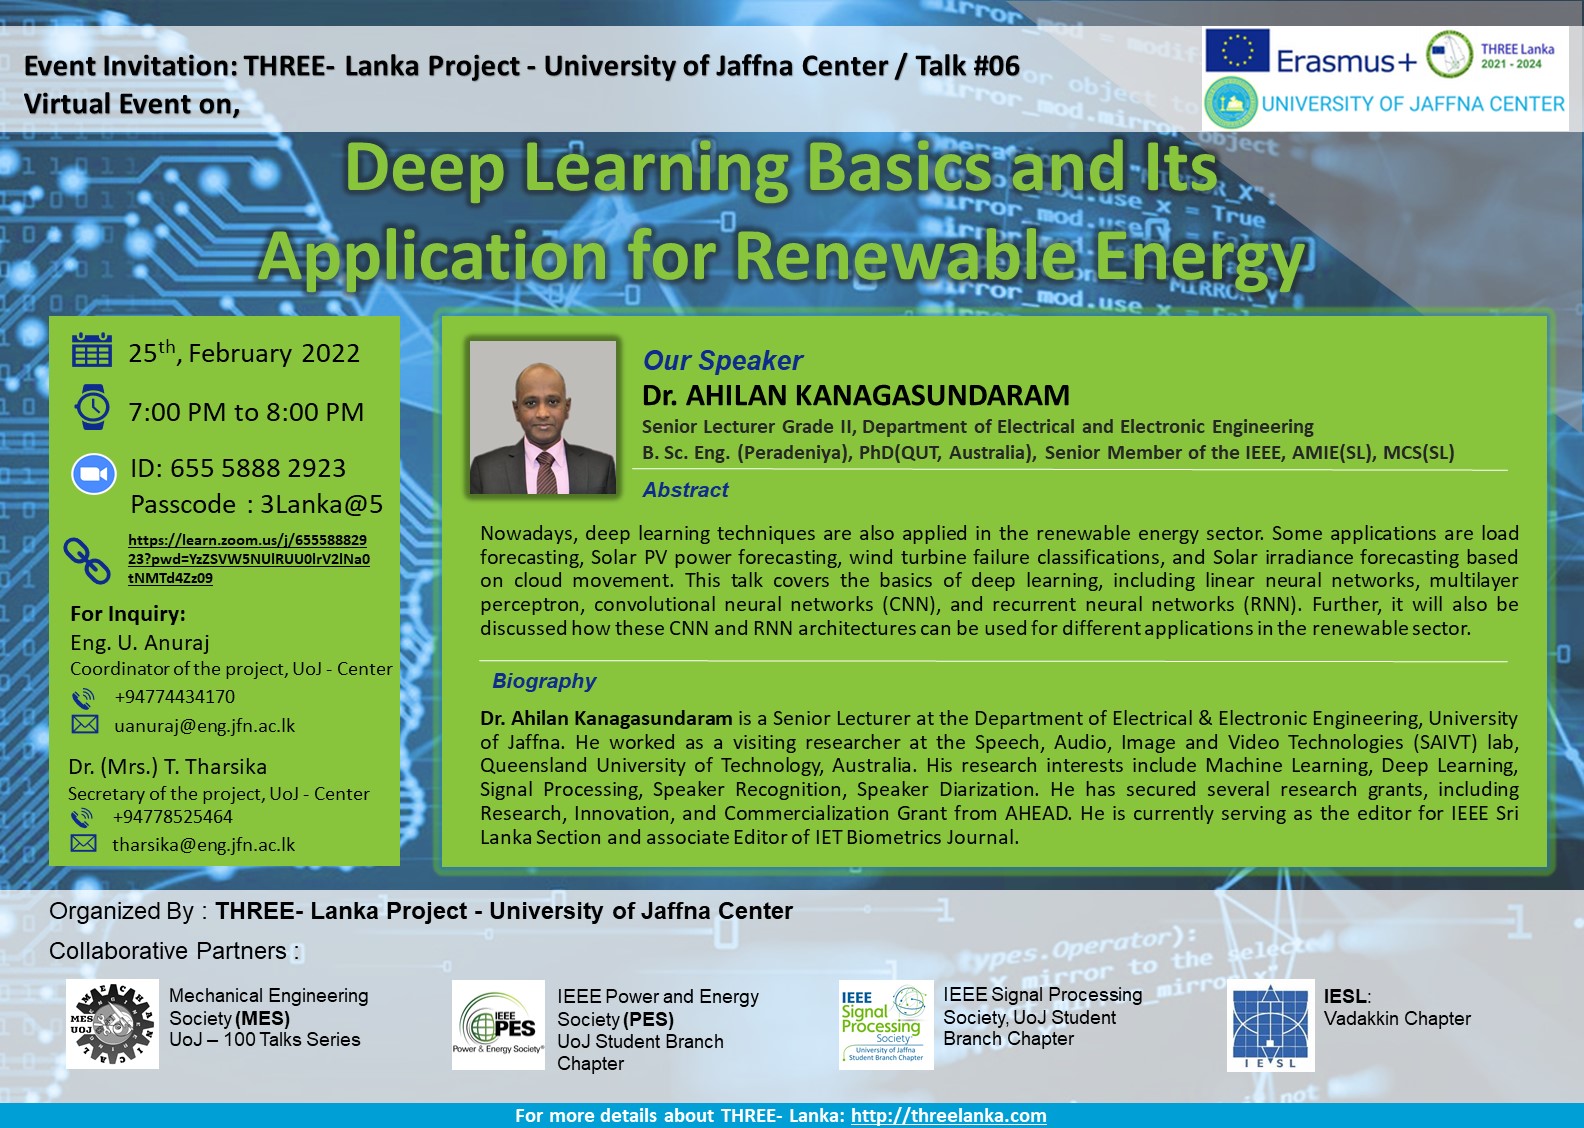 Virtual event on Deep Learning Basics and its Application for Renewable Energy